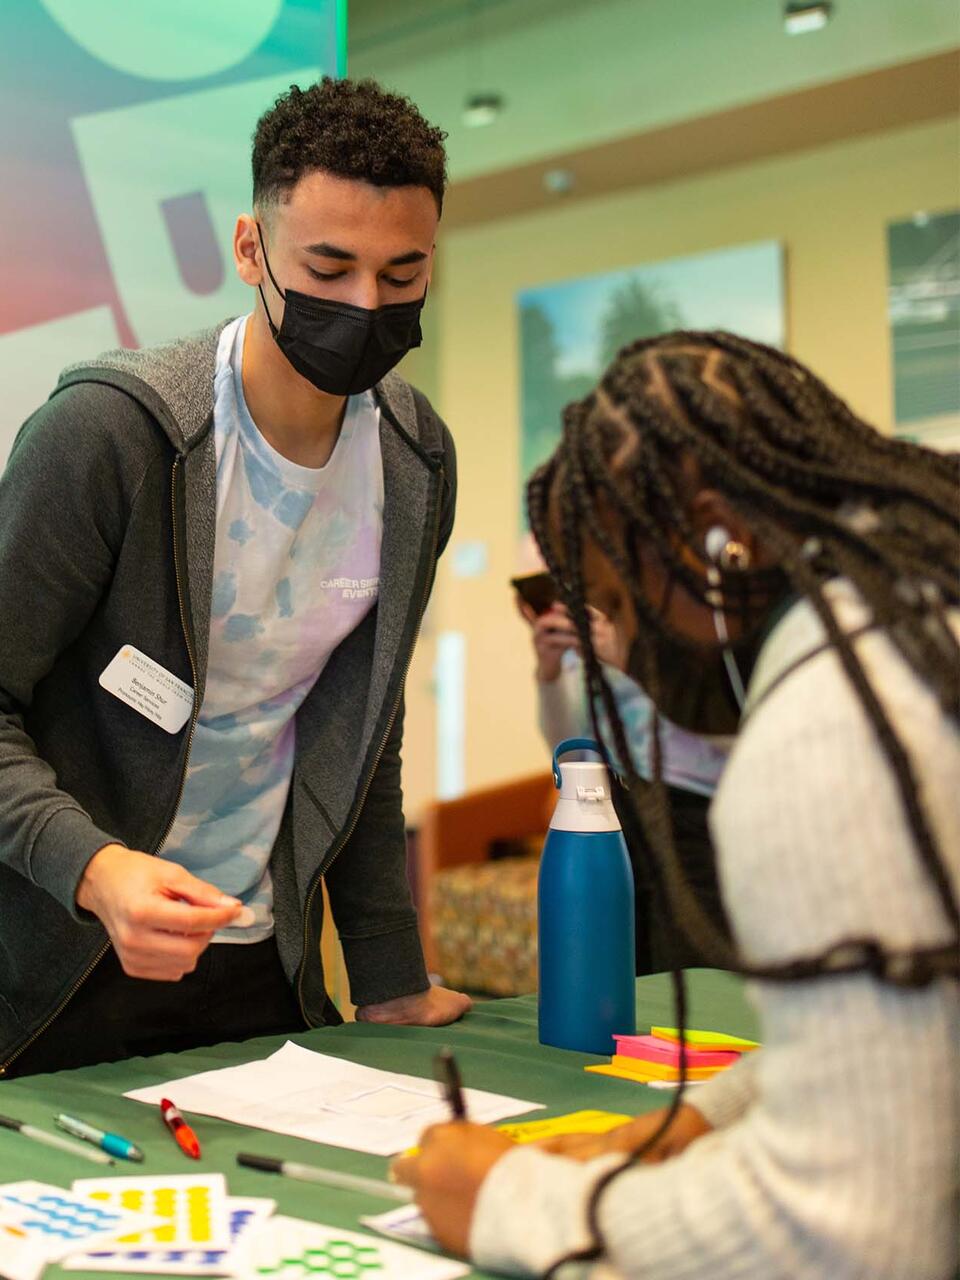 Student wearing a mask gathers materials off a table at jobs fest.